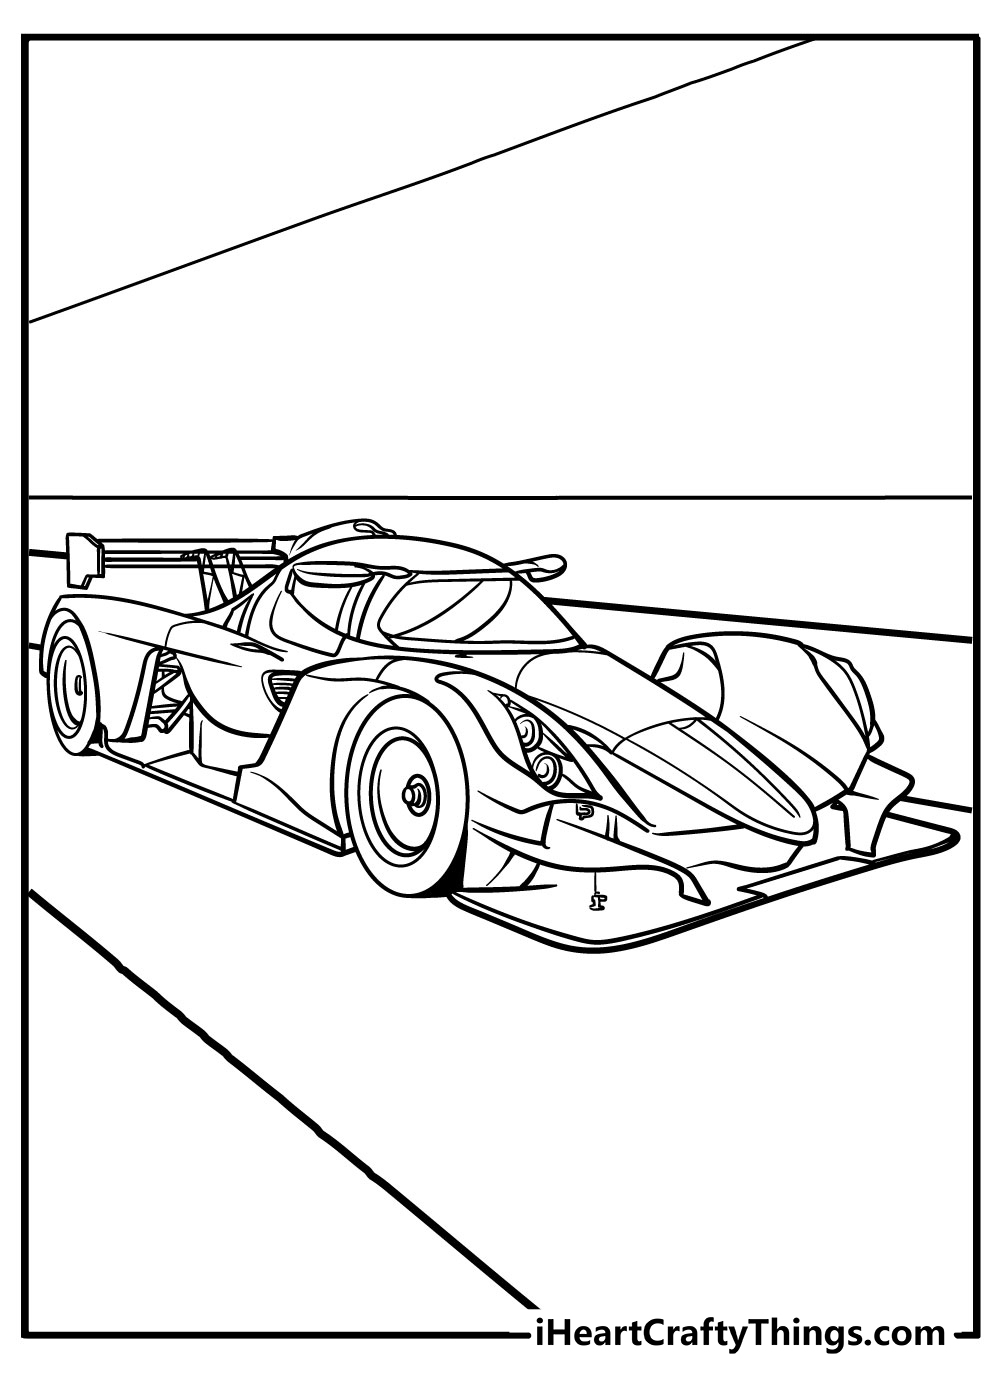 Printable Super Cars Coloring Pages Updated 20